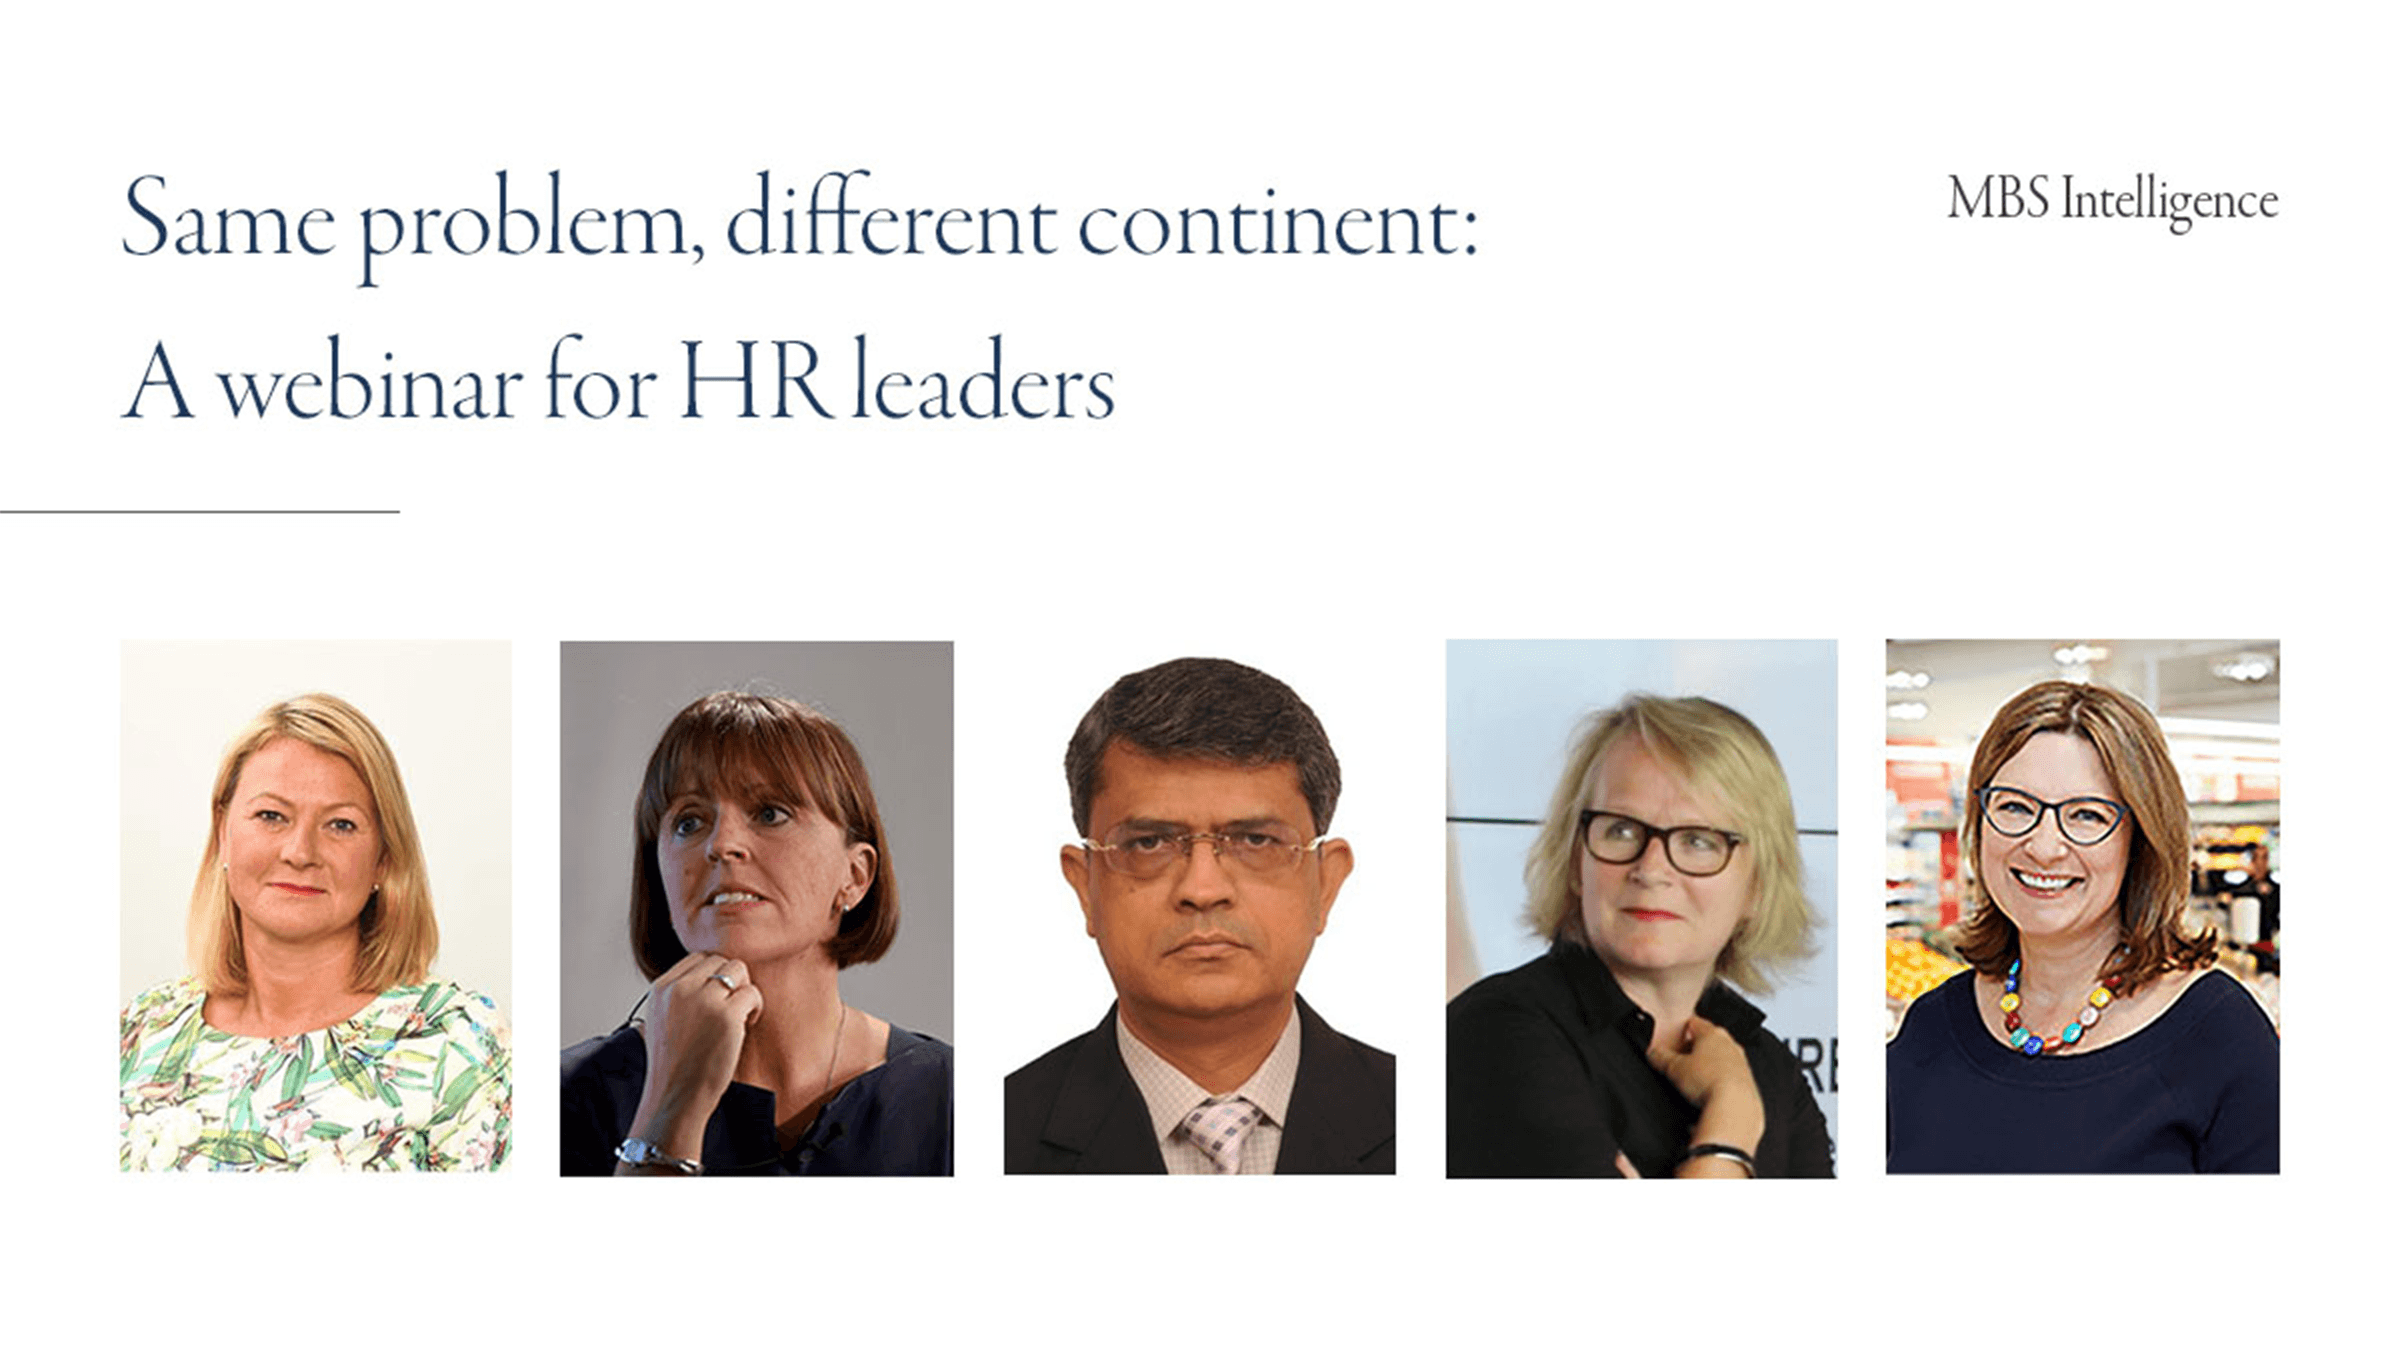 Same problem, different continent: a webinar for HR leaders